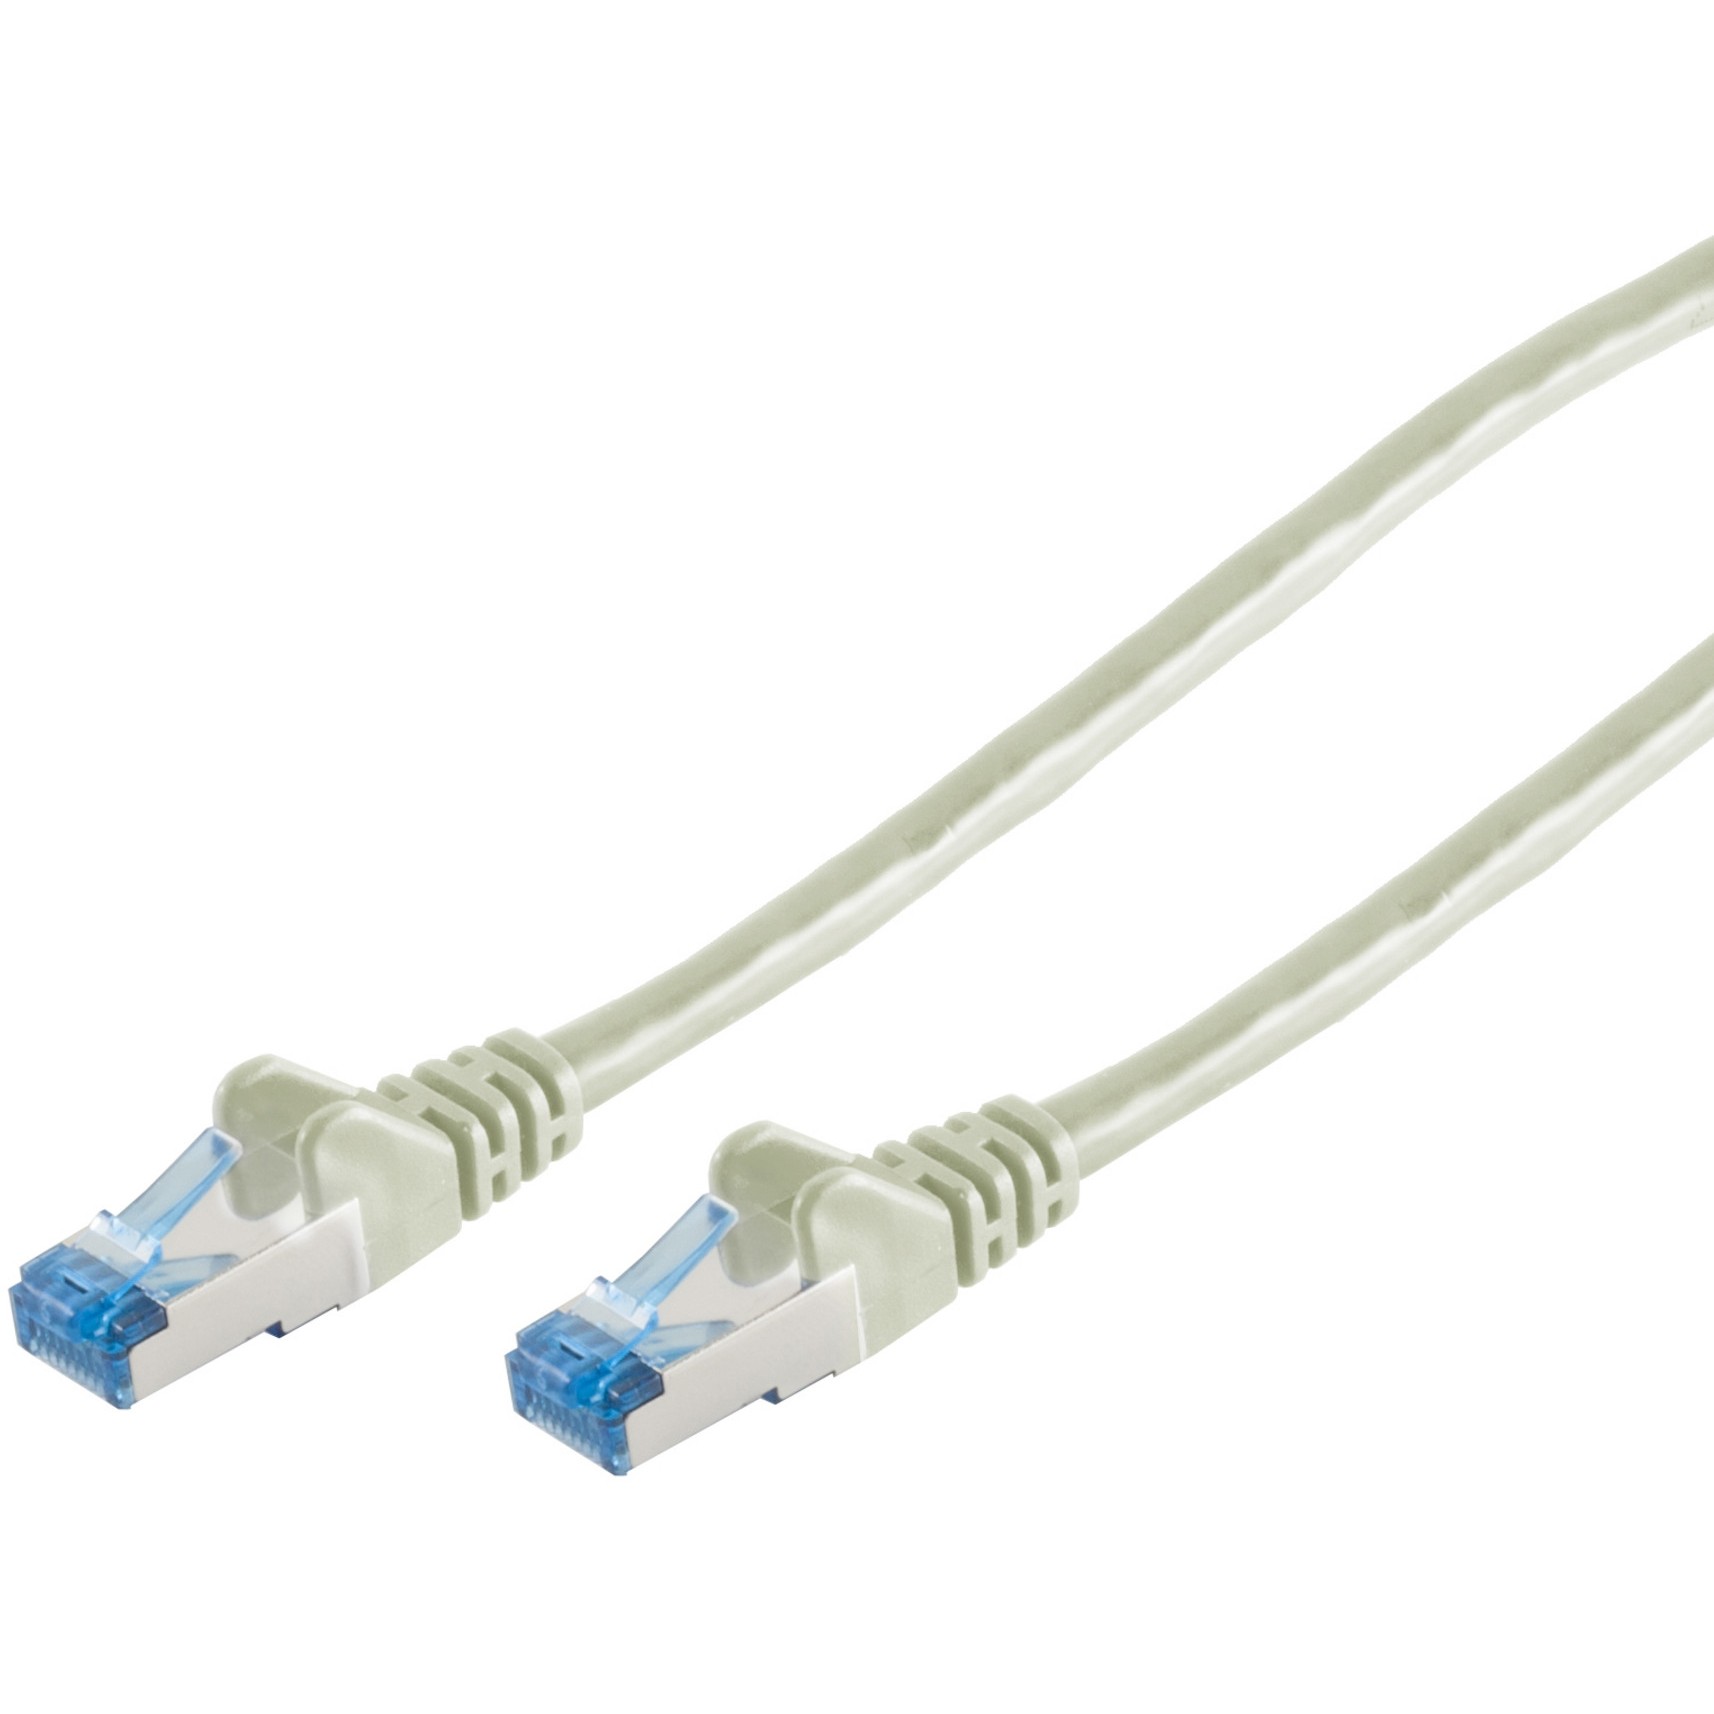 S-Conn 75711 networking cable